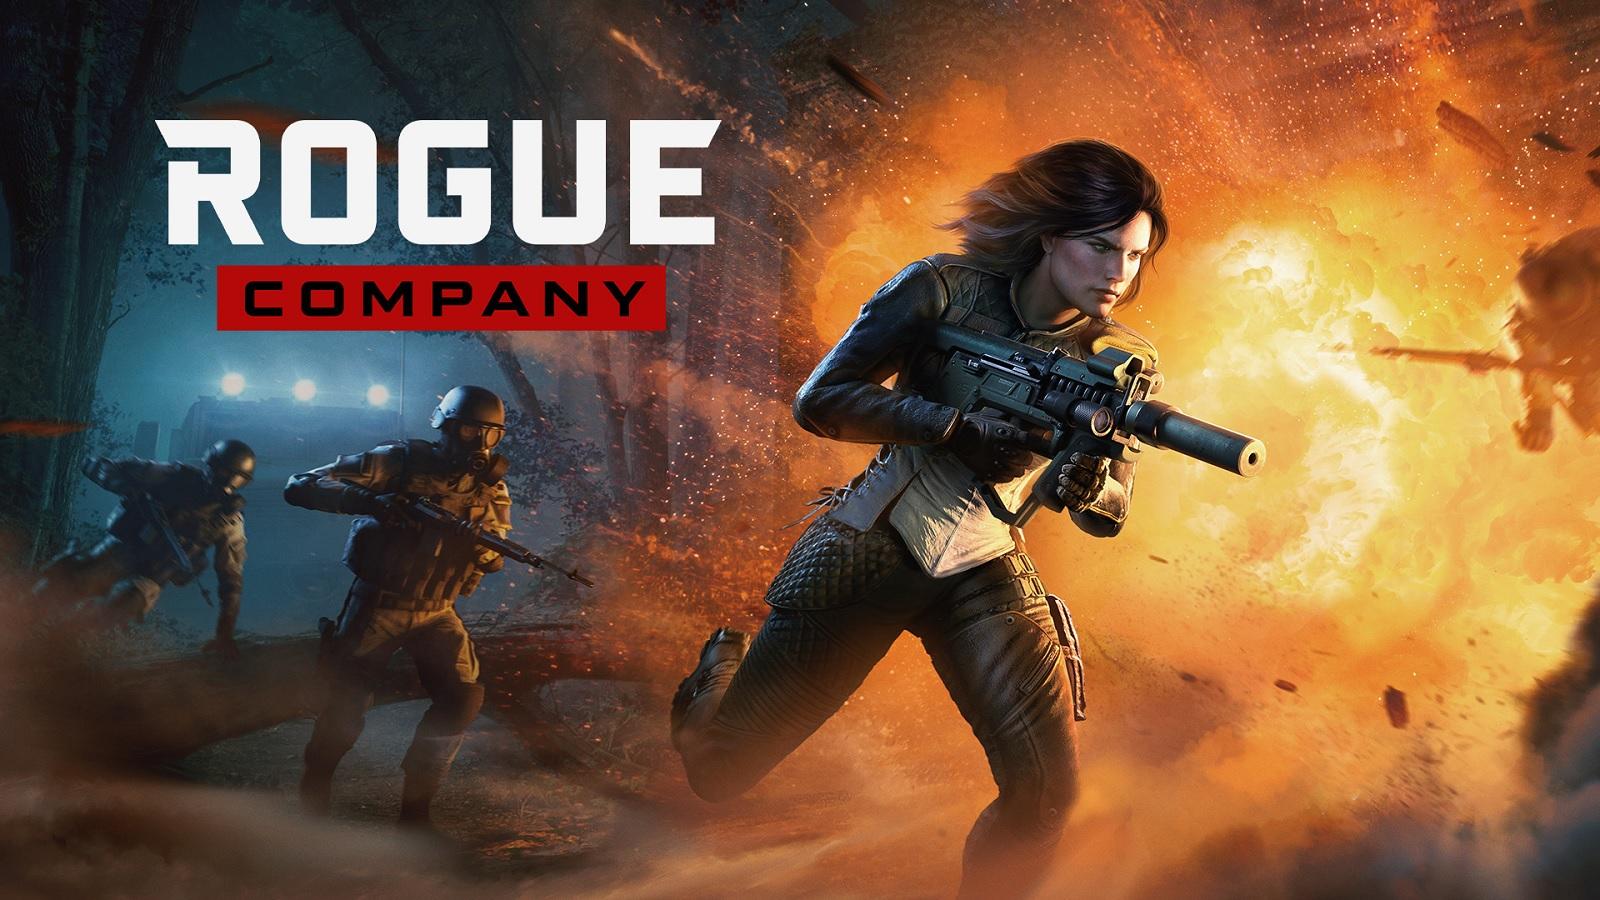 Rogue Company on X: So Rogues, what did you think of